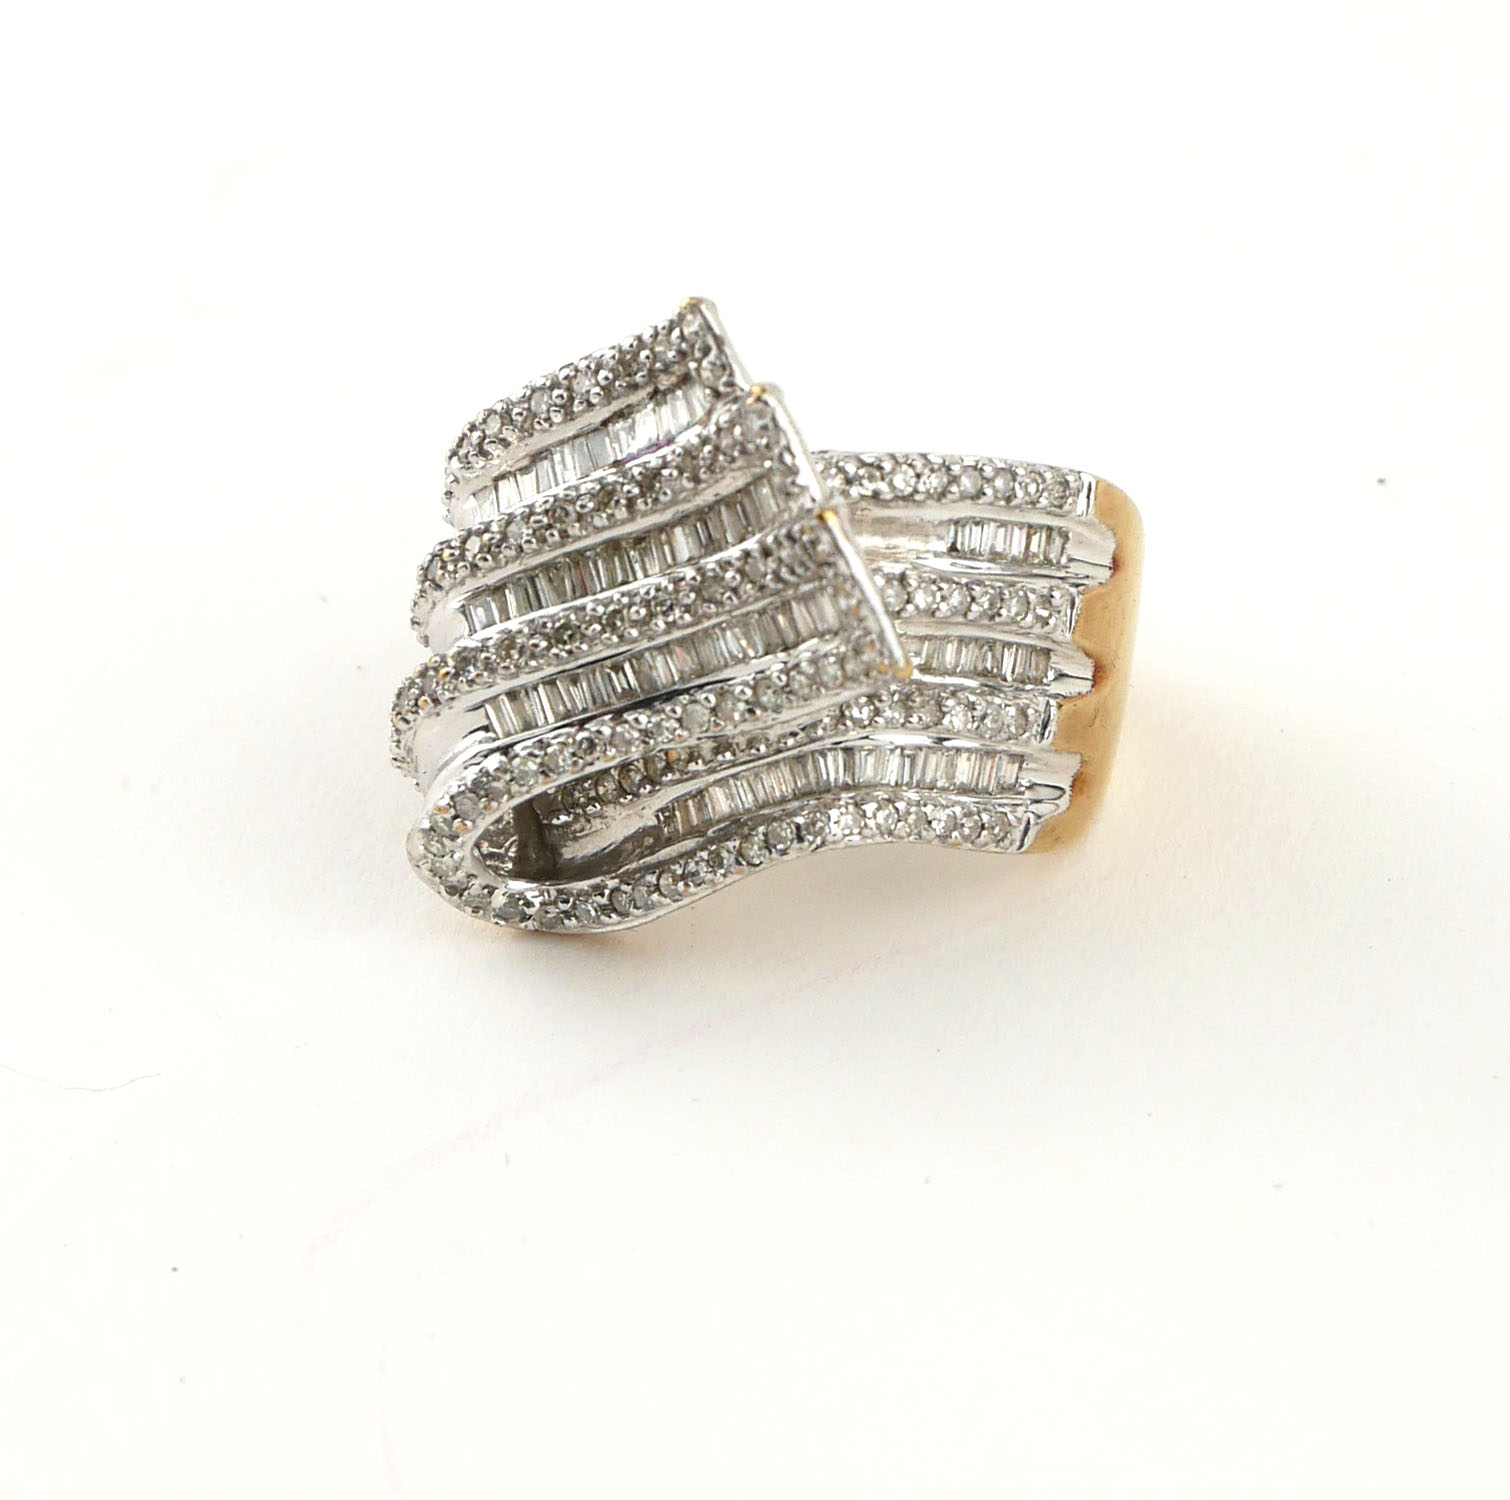 AN 18CT WHITE GOLD BAGUETTE CUT AND PAVÉ SET DIAMOND TWIRL RING, CIRCA 1970 (size L½). - Image 3 of 4